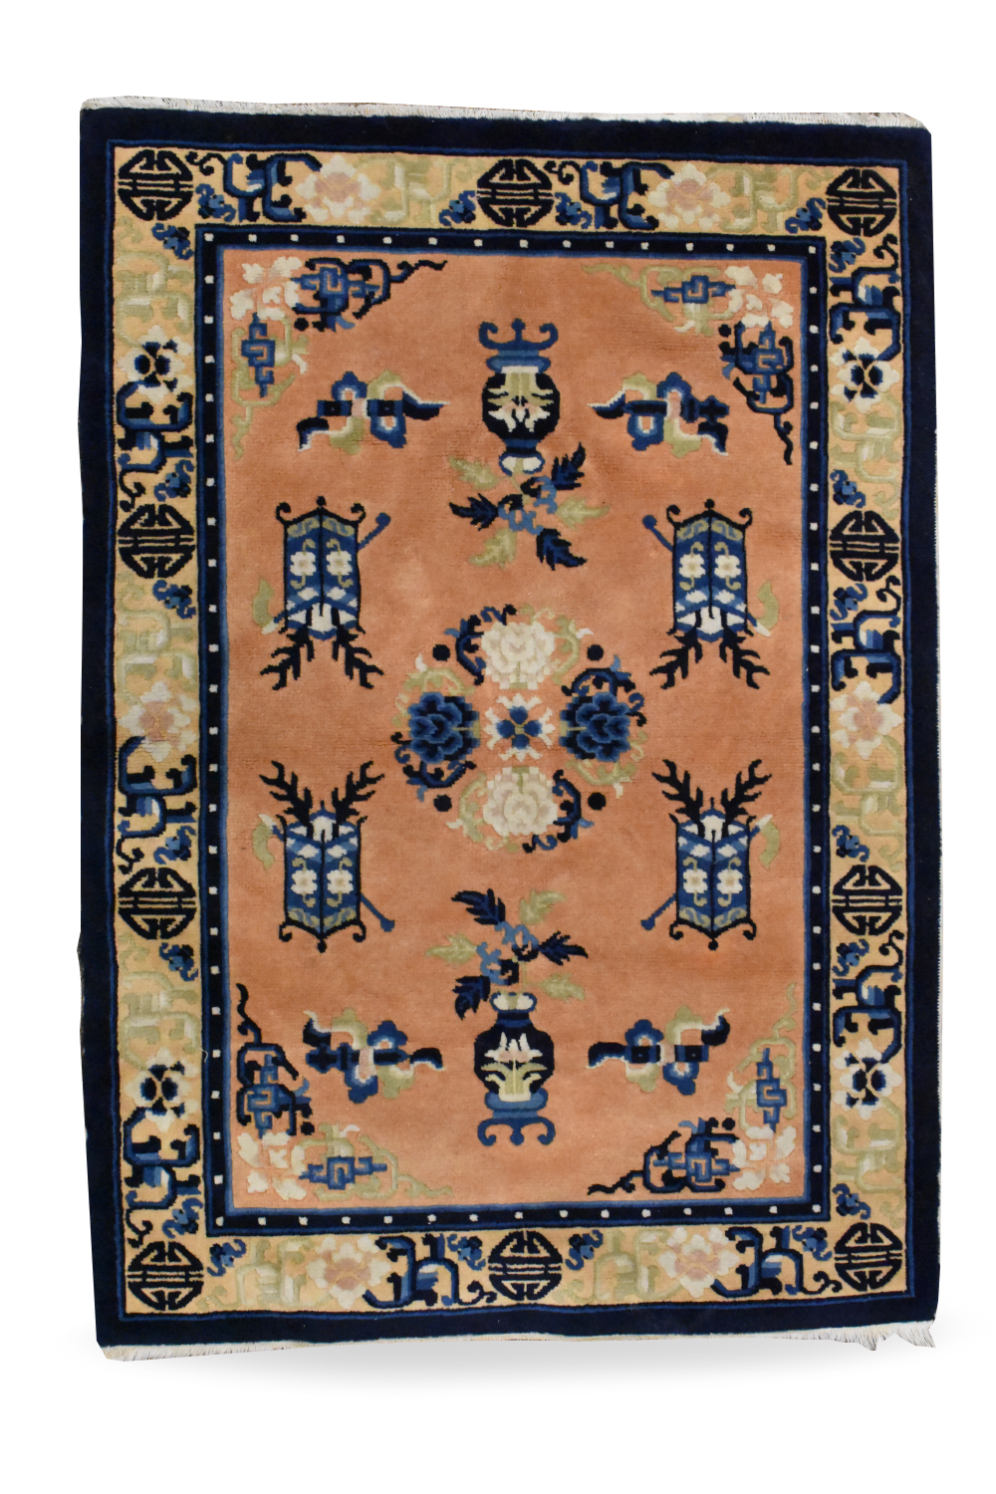 CHINESE EMBRODIERY CARPET W DRAGONS  33a134